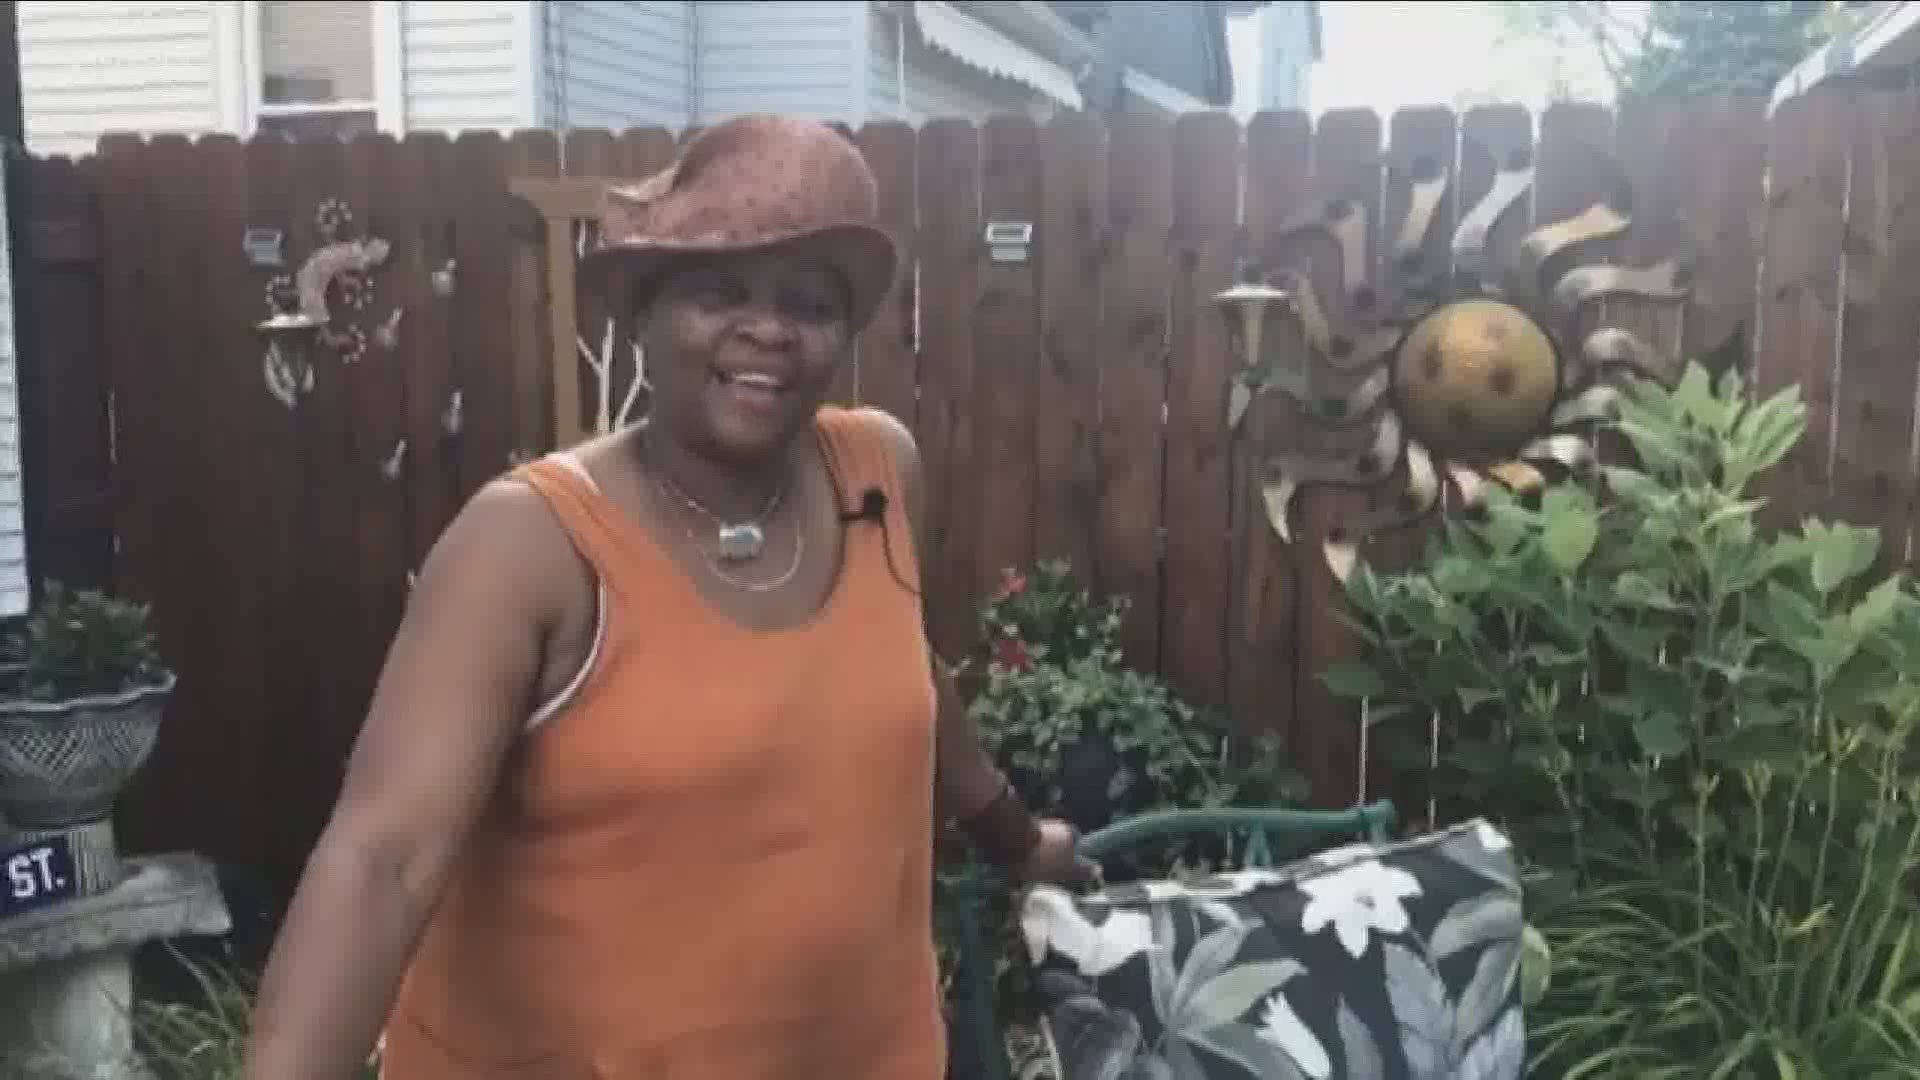 East Side Garden Walk gardeners say the virtual parts of the month helped them reach a new audience